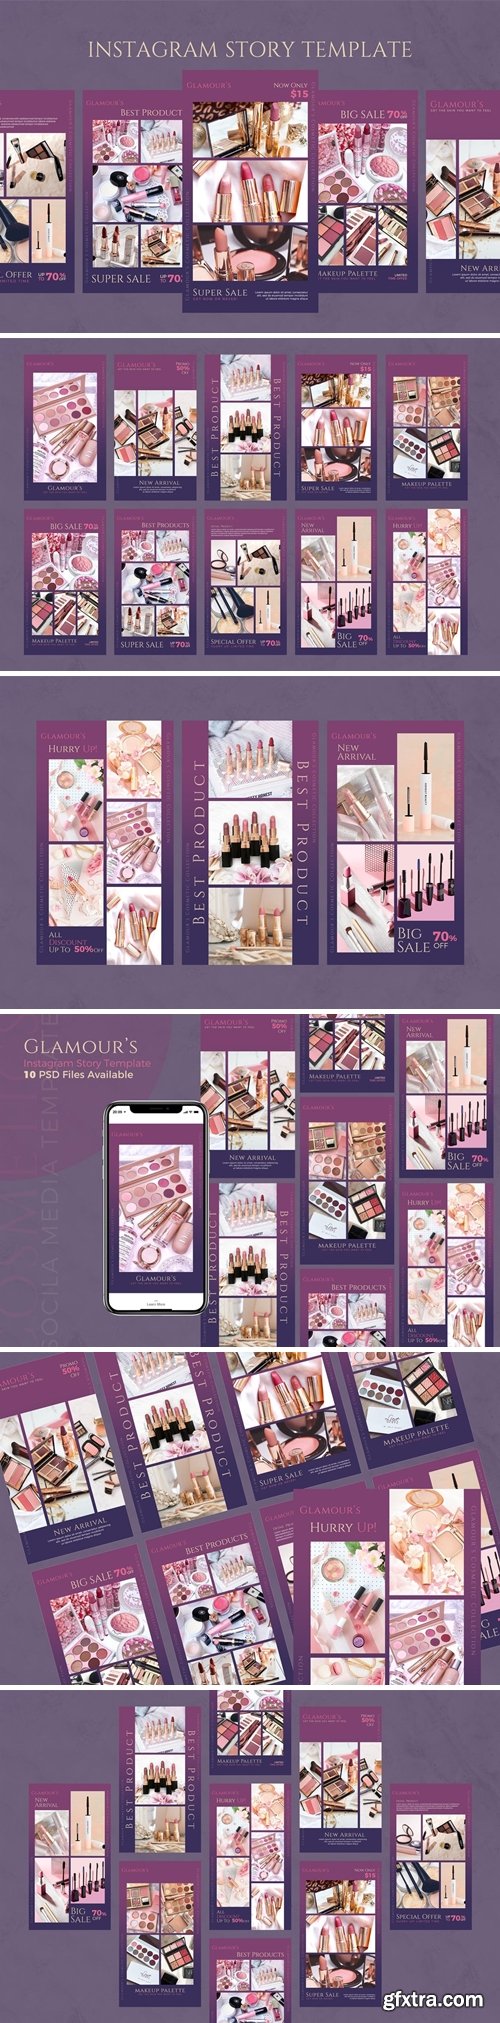 Glamour\'s - Cosmetic Instagram Story Template